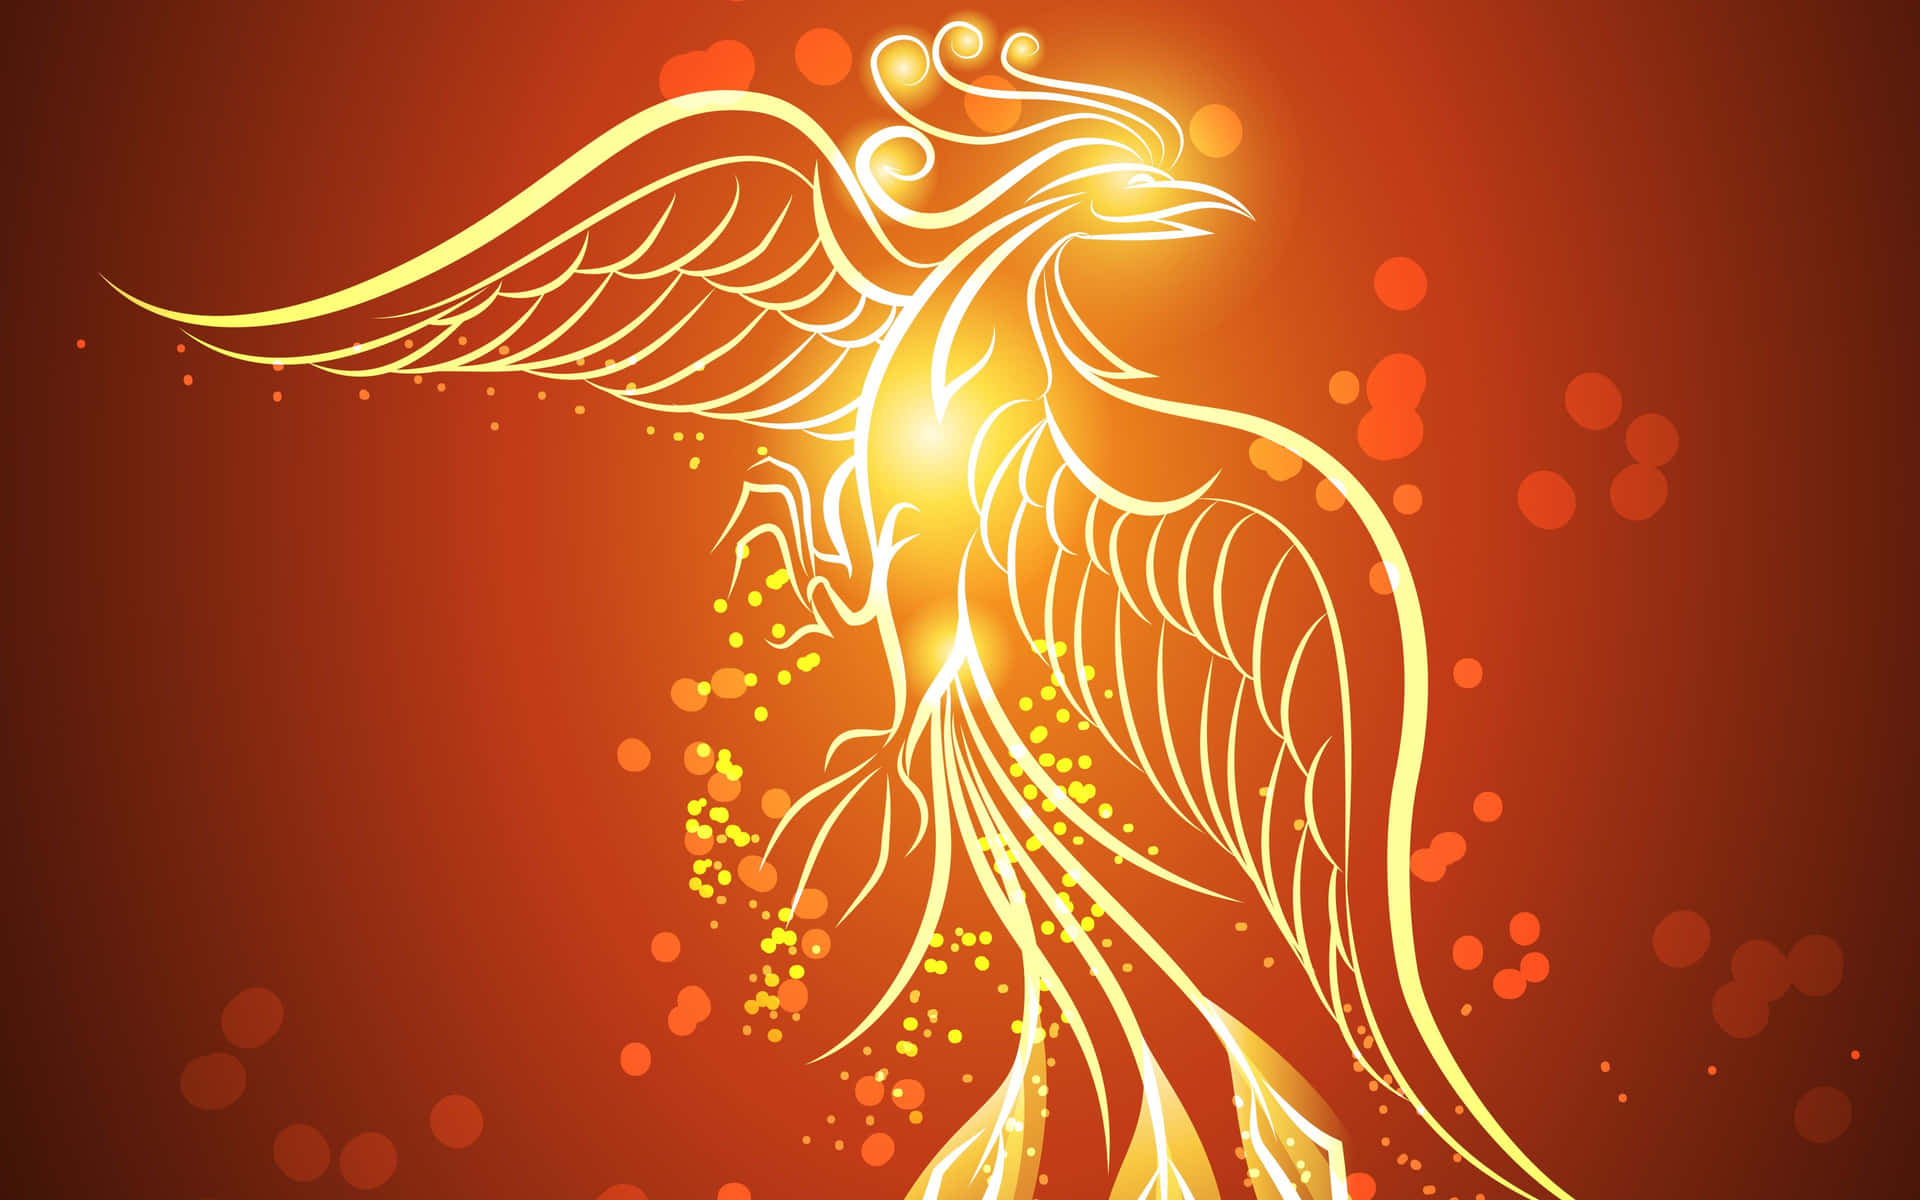 A Golden Phoenix On A Red Background